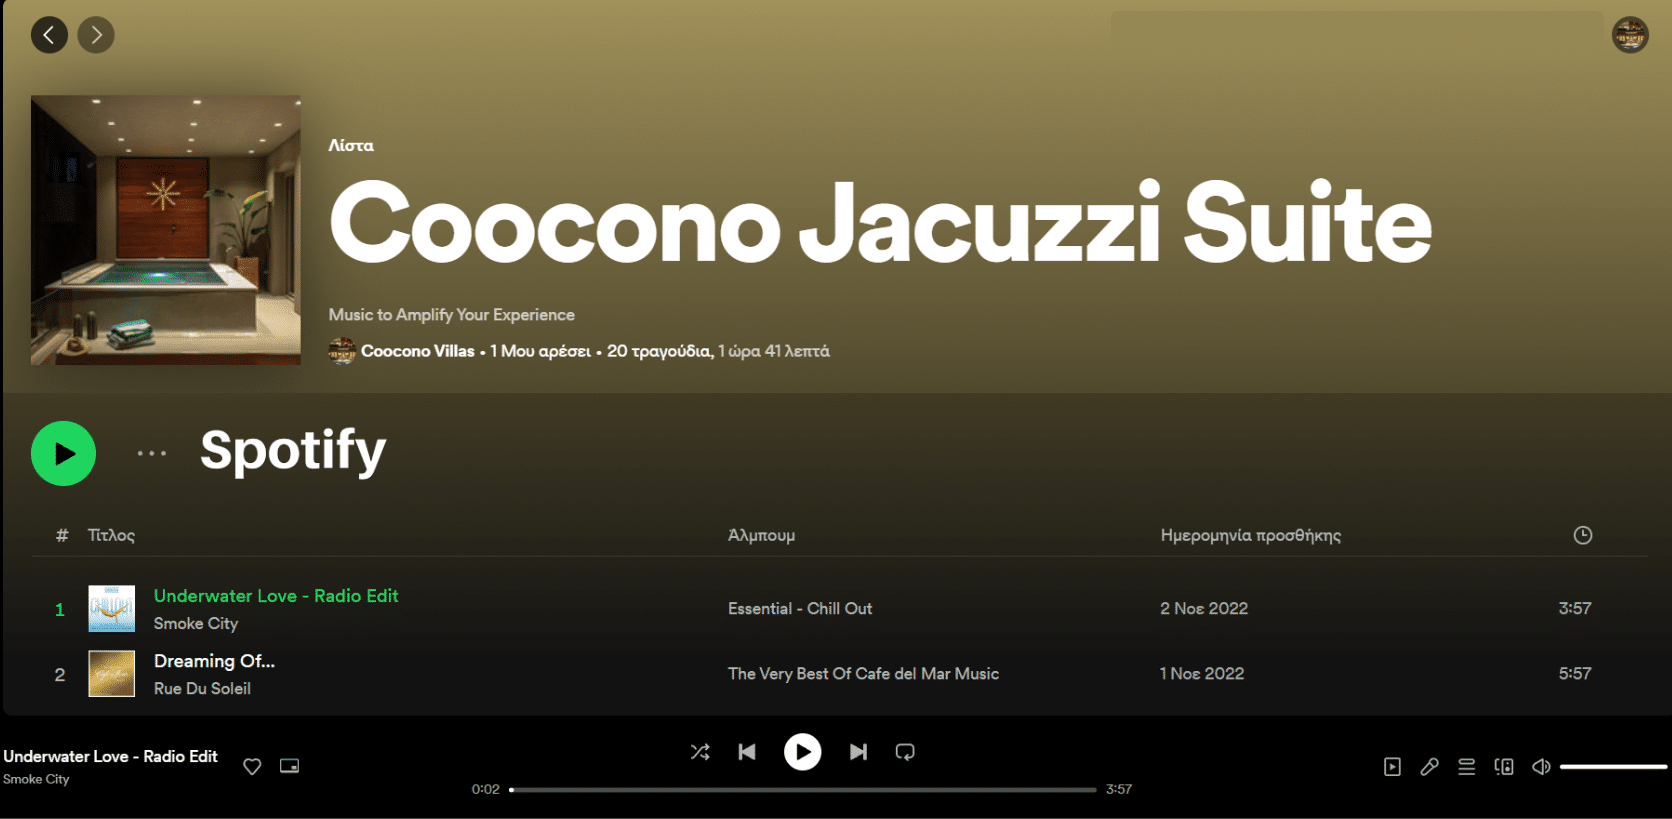 It shows the Coocono Spotify Compilation for the Jacuzzi Suite